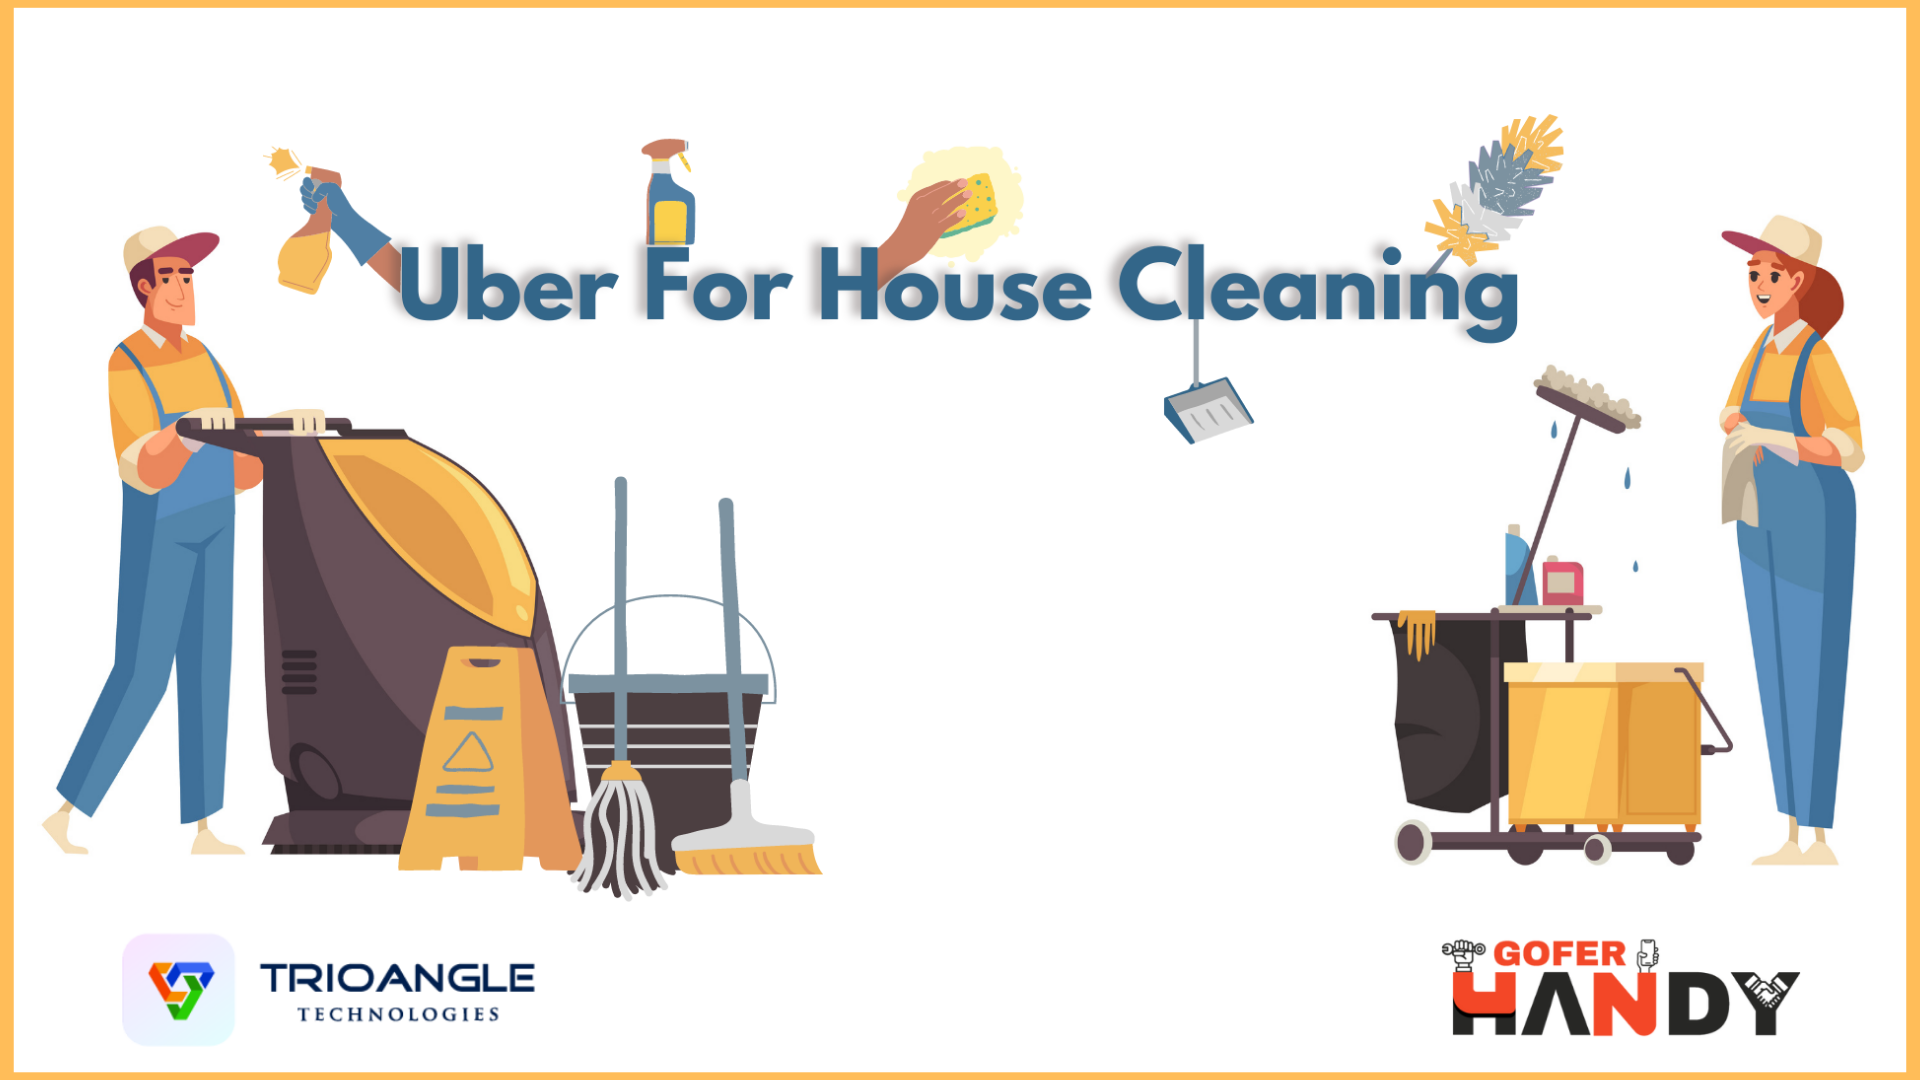 Article about House cleaning service app